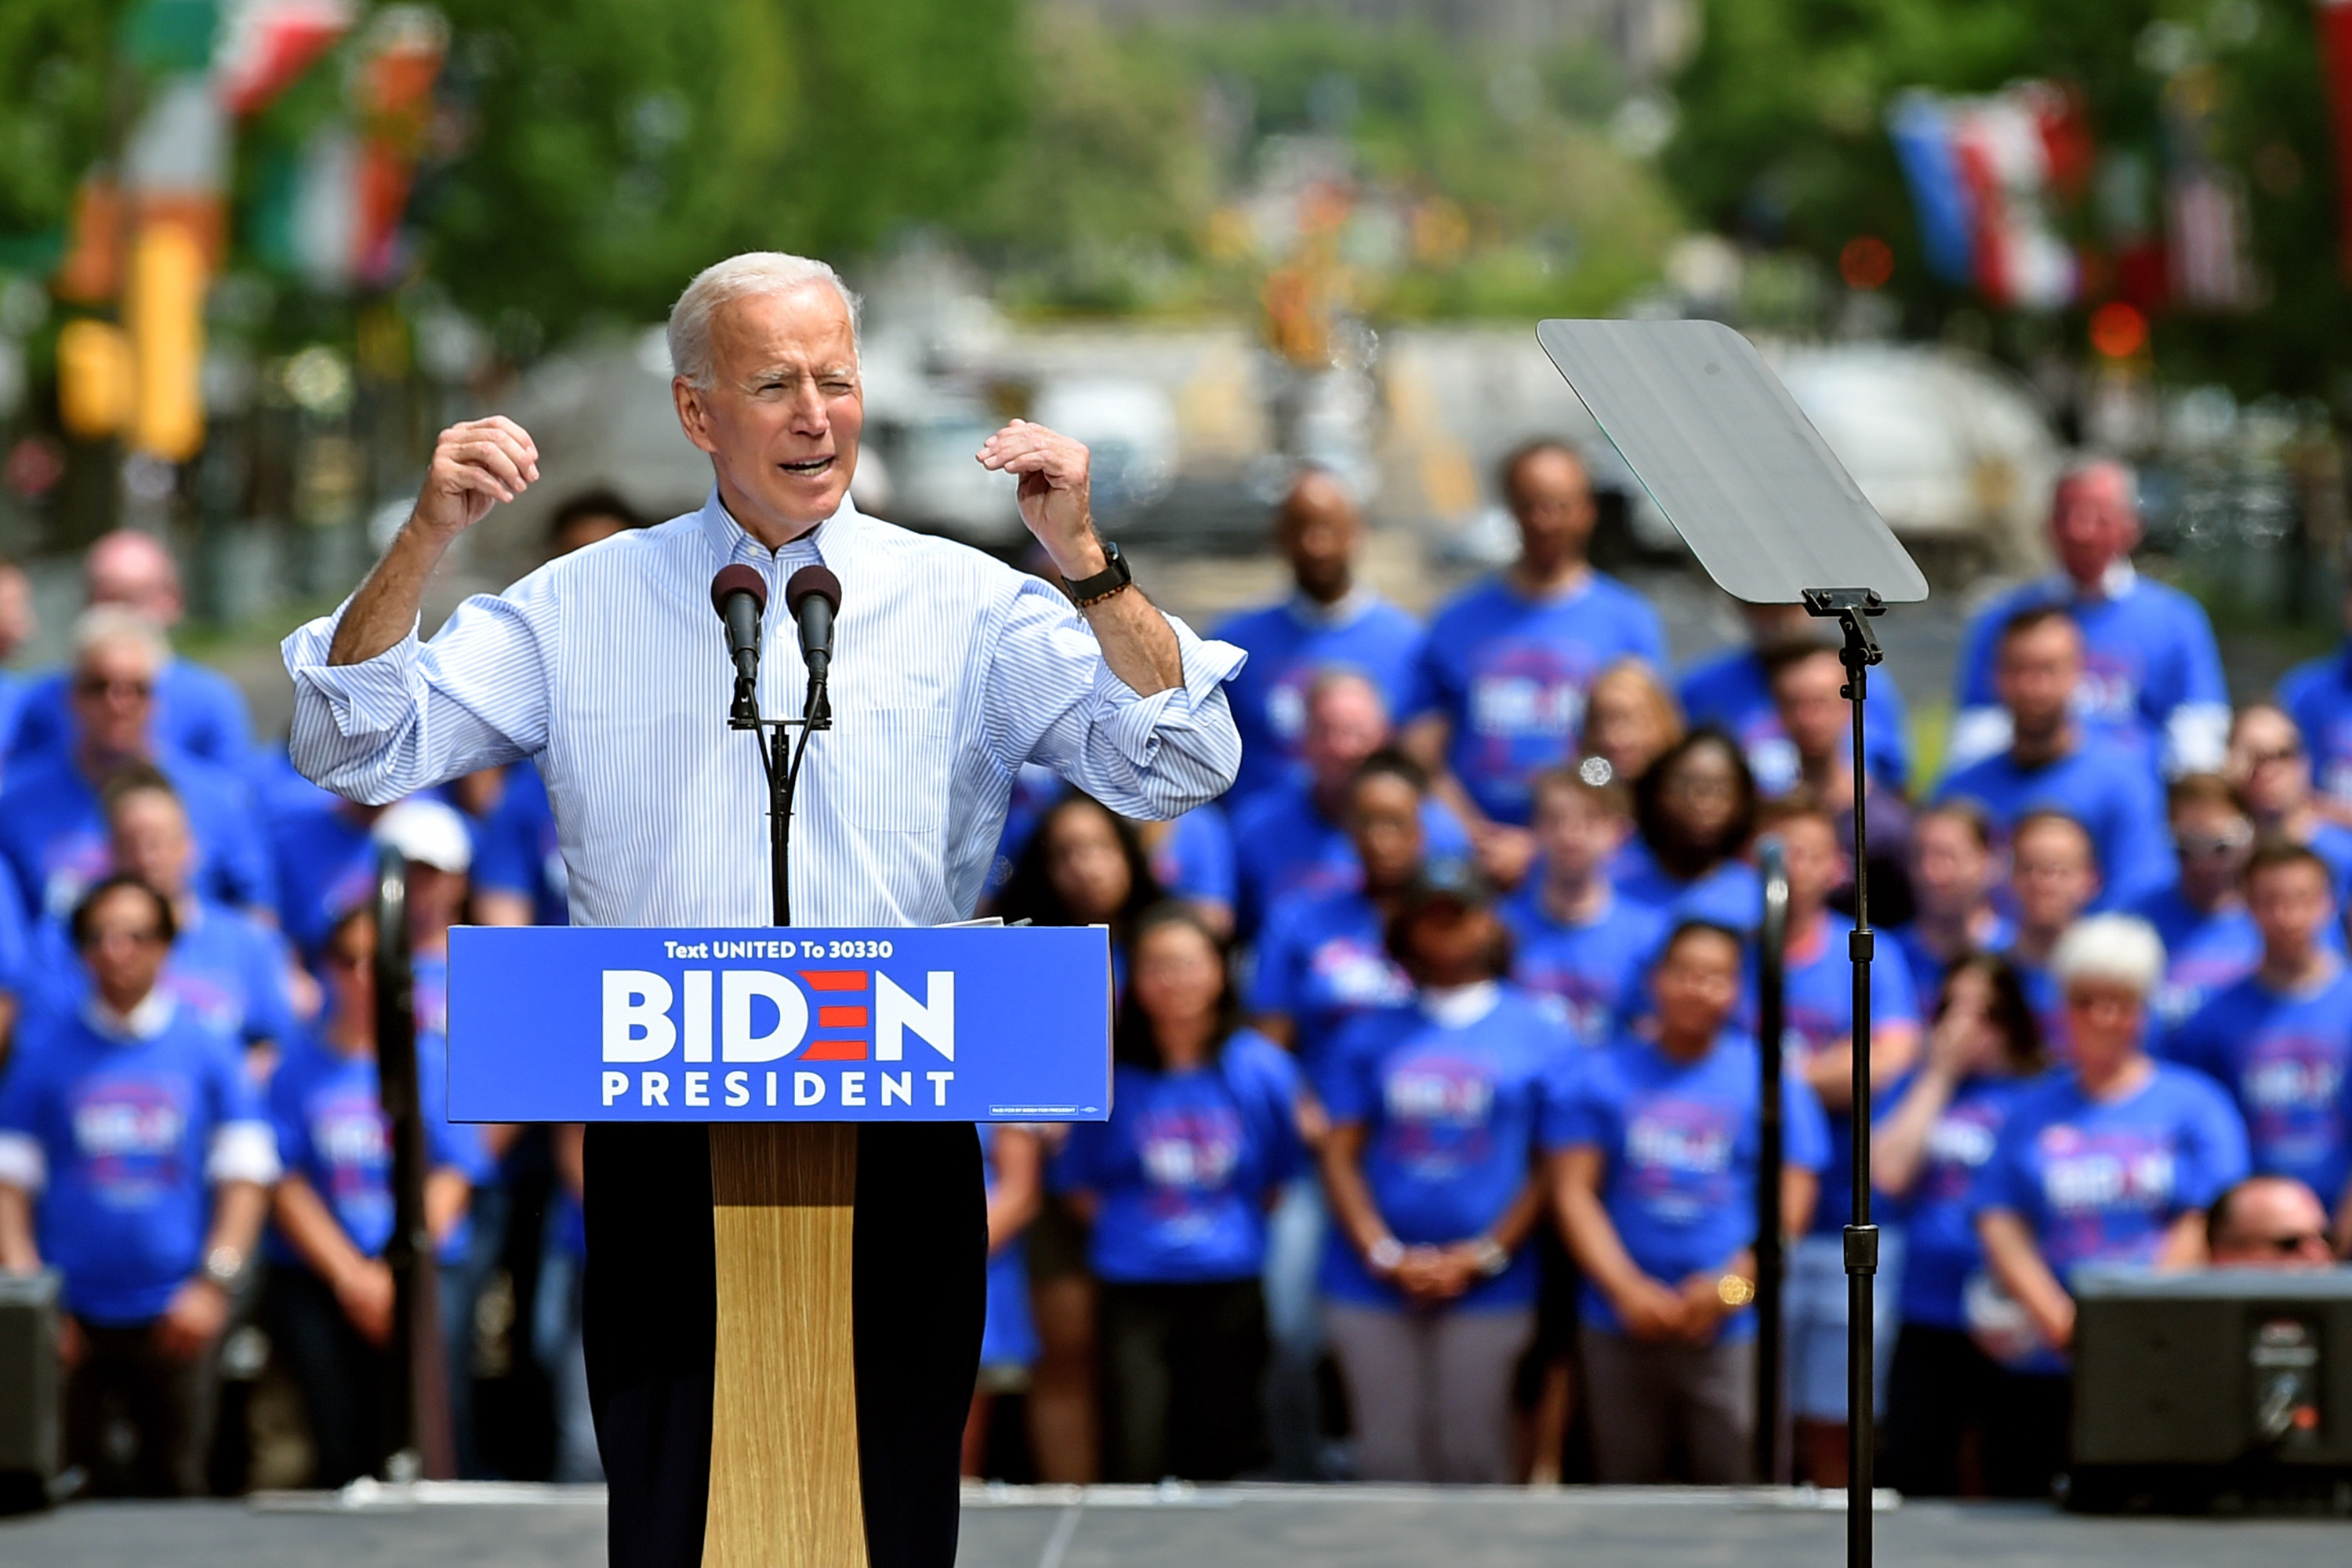 Thorny Hyret gør det fladt In Philly rally, Joe Biden offers unity to replace Trump's 'hatred'